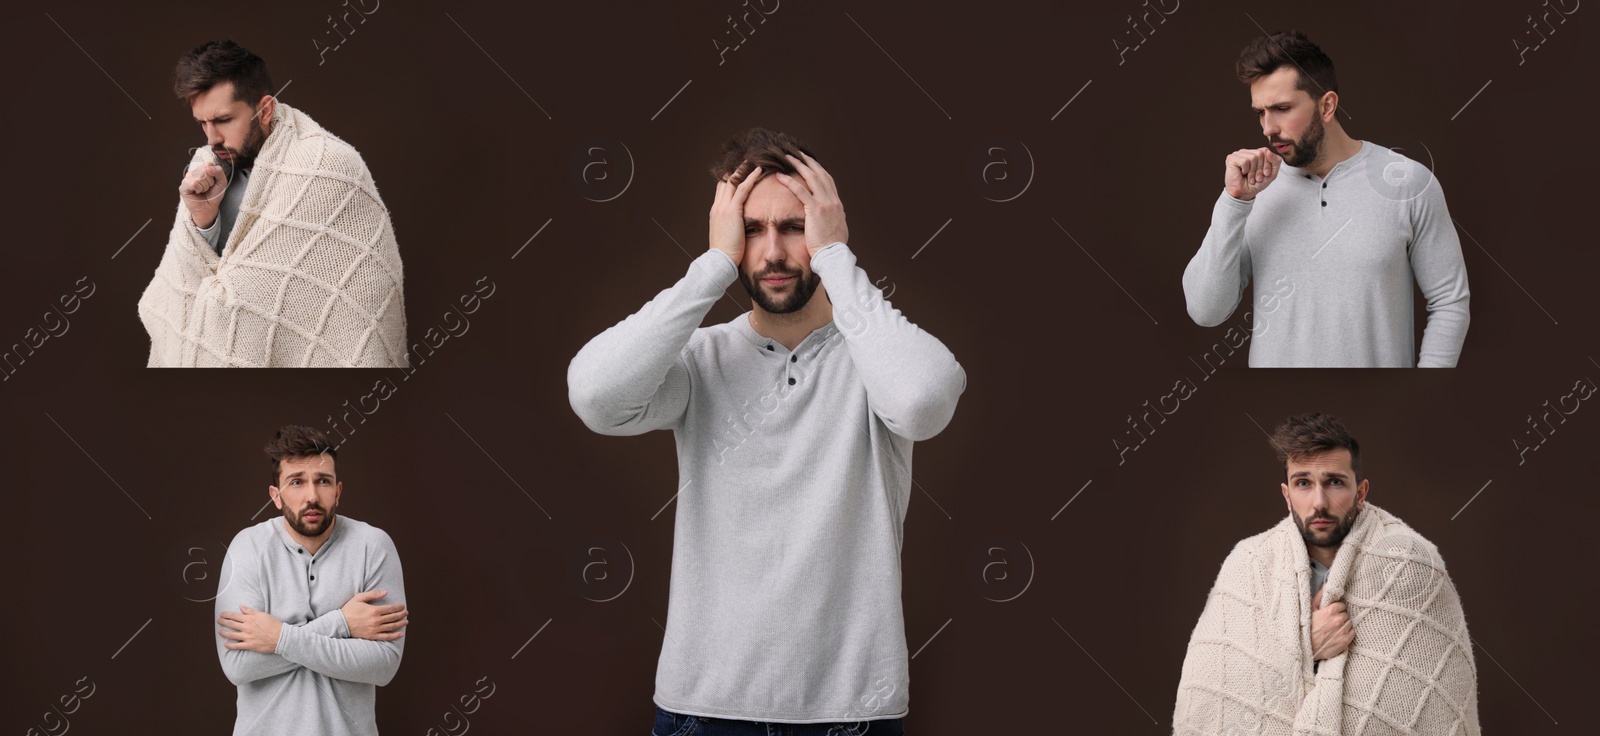 Image of Collage with photos of man with cold symptoms on brown background. Banner design